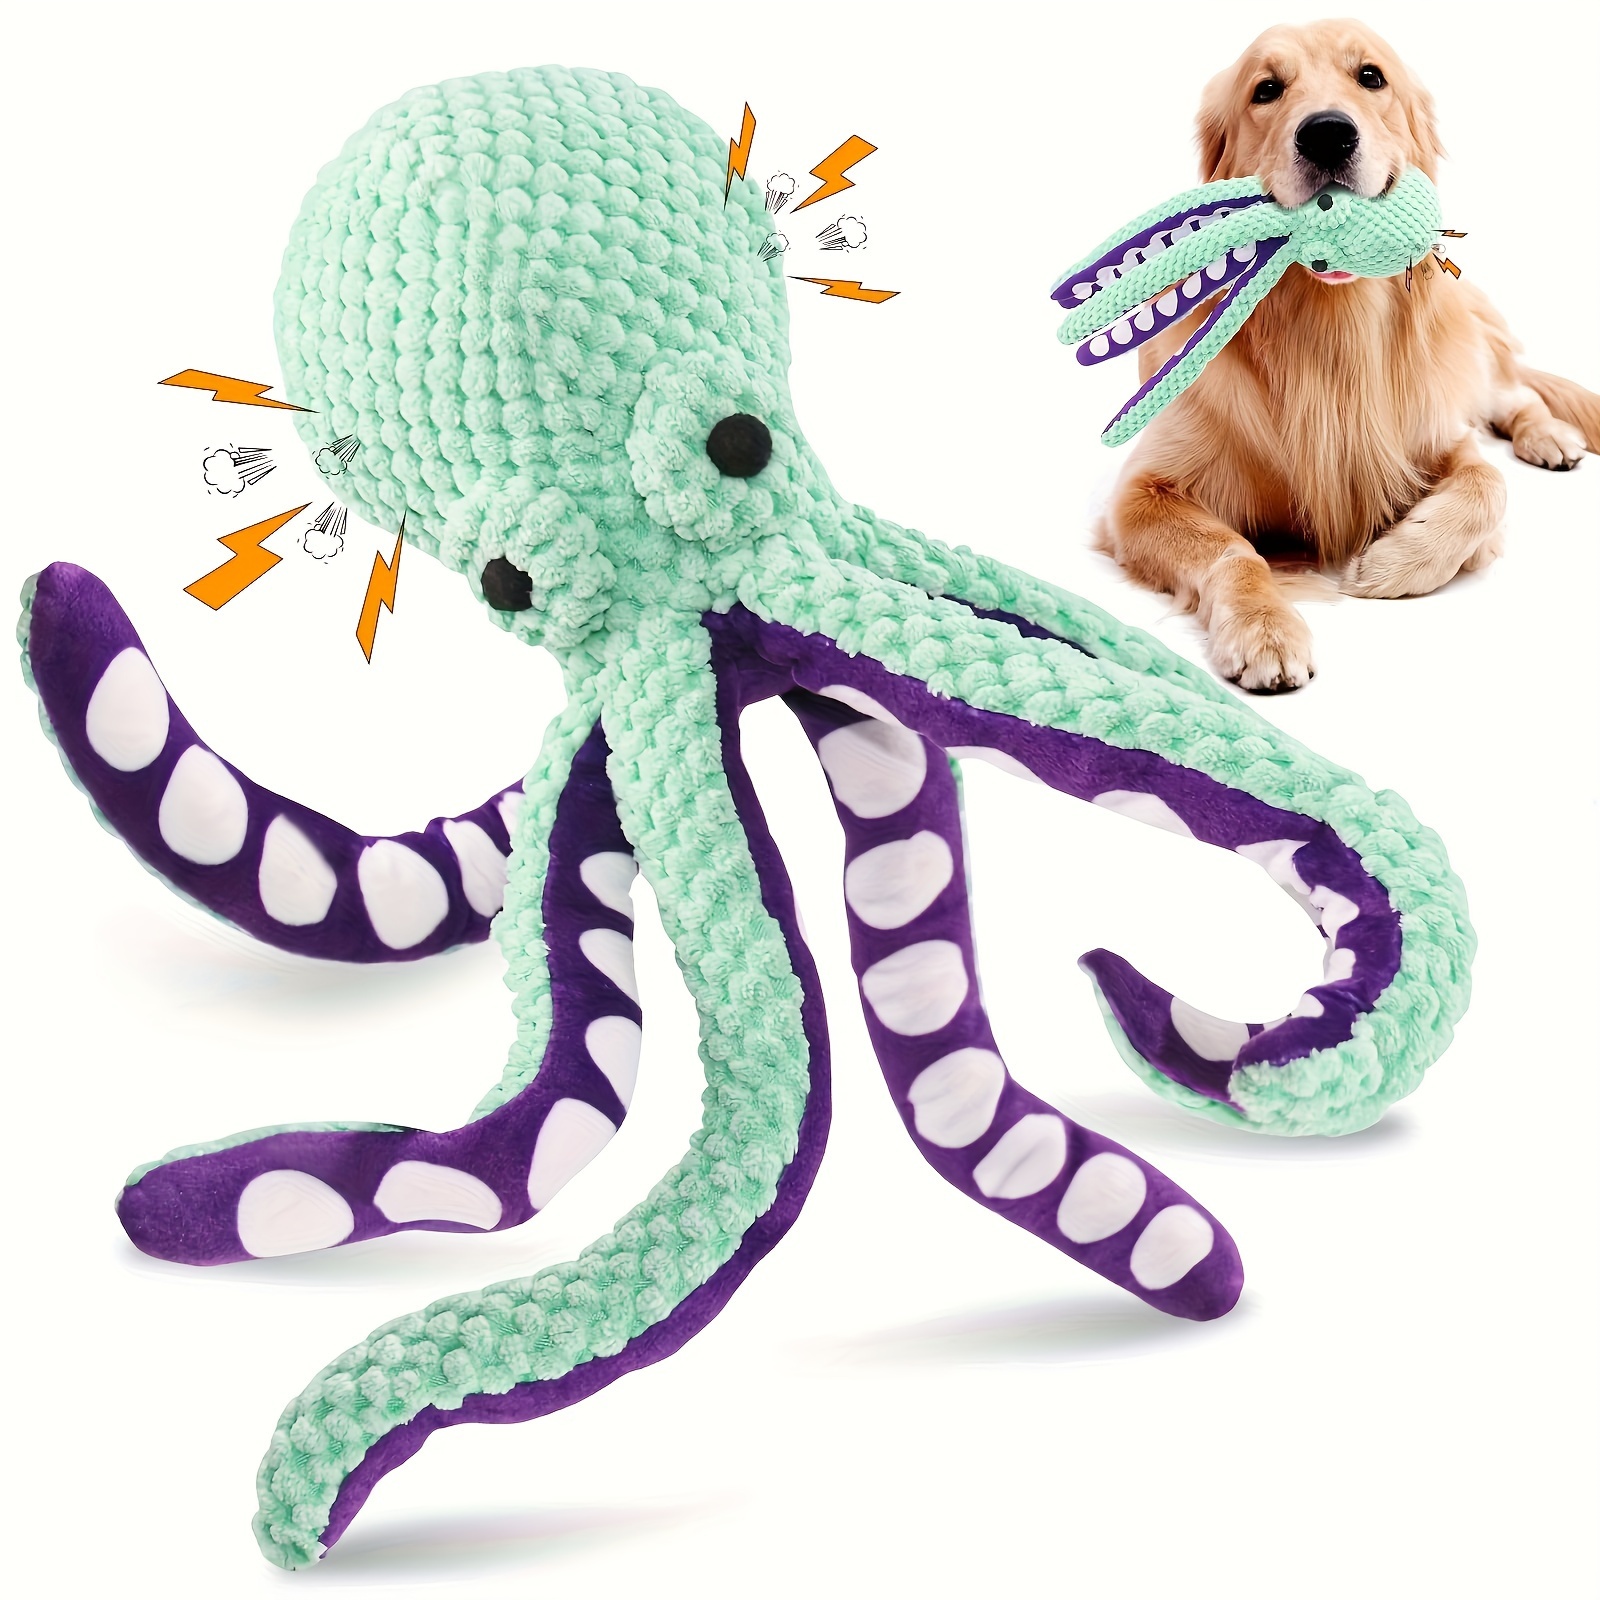 

Squeaky Octopus Plush Dog Toy - Durable Cotton Chew Toy For Large Dogs, Cartoon-octopus Patterned Interactive Pet Teething Toy, 1 Piece